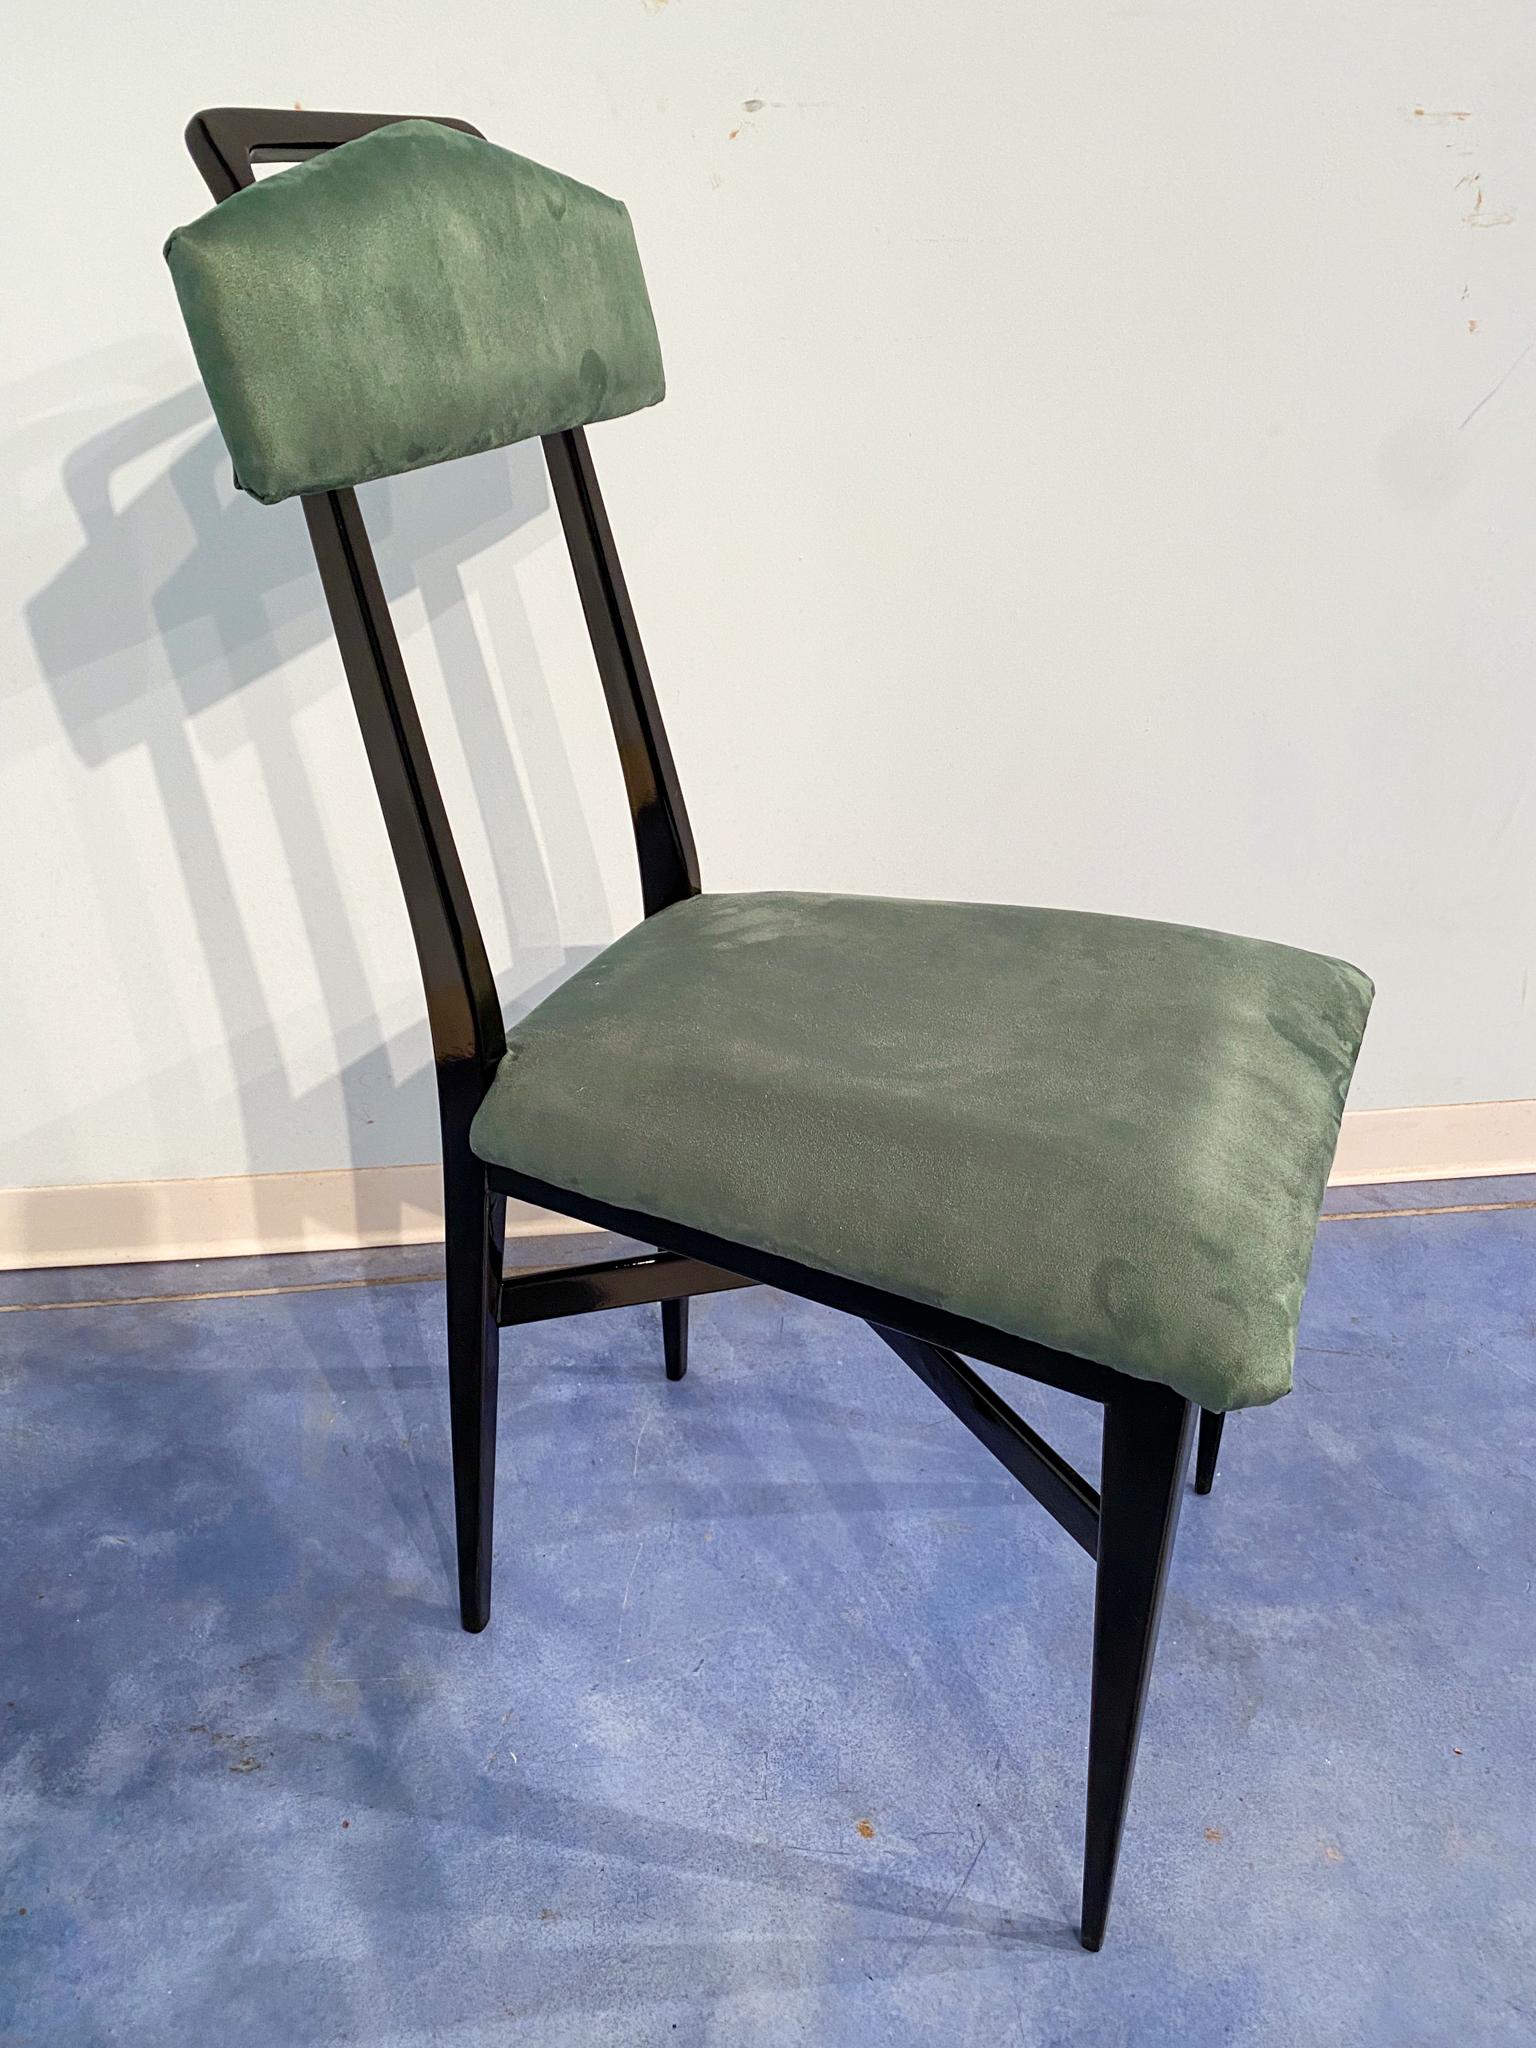 Italian Mid-Century Black and Green Color Dining Chairs, Set of Six, 1950s For Sale 9